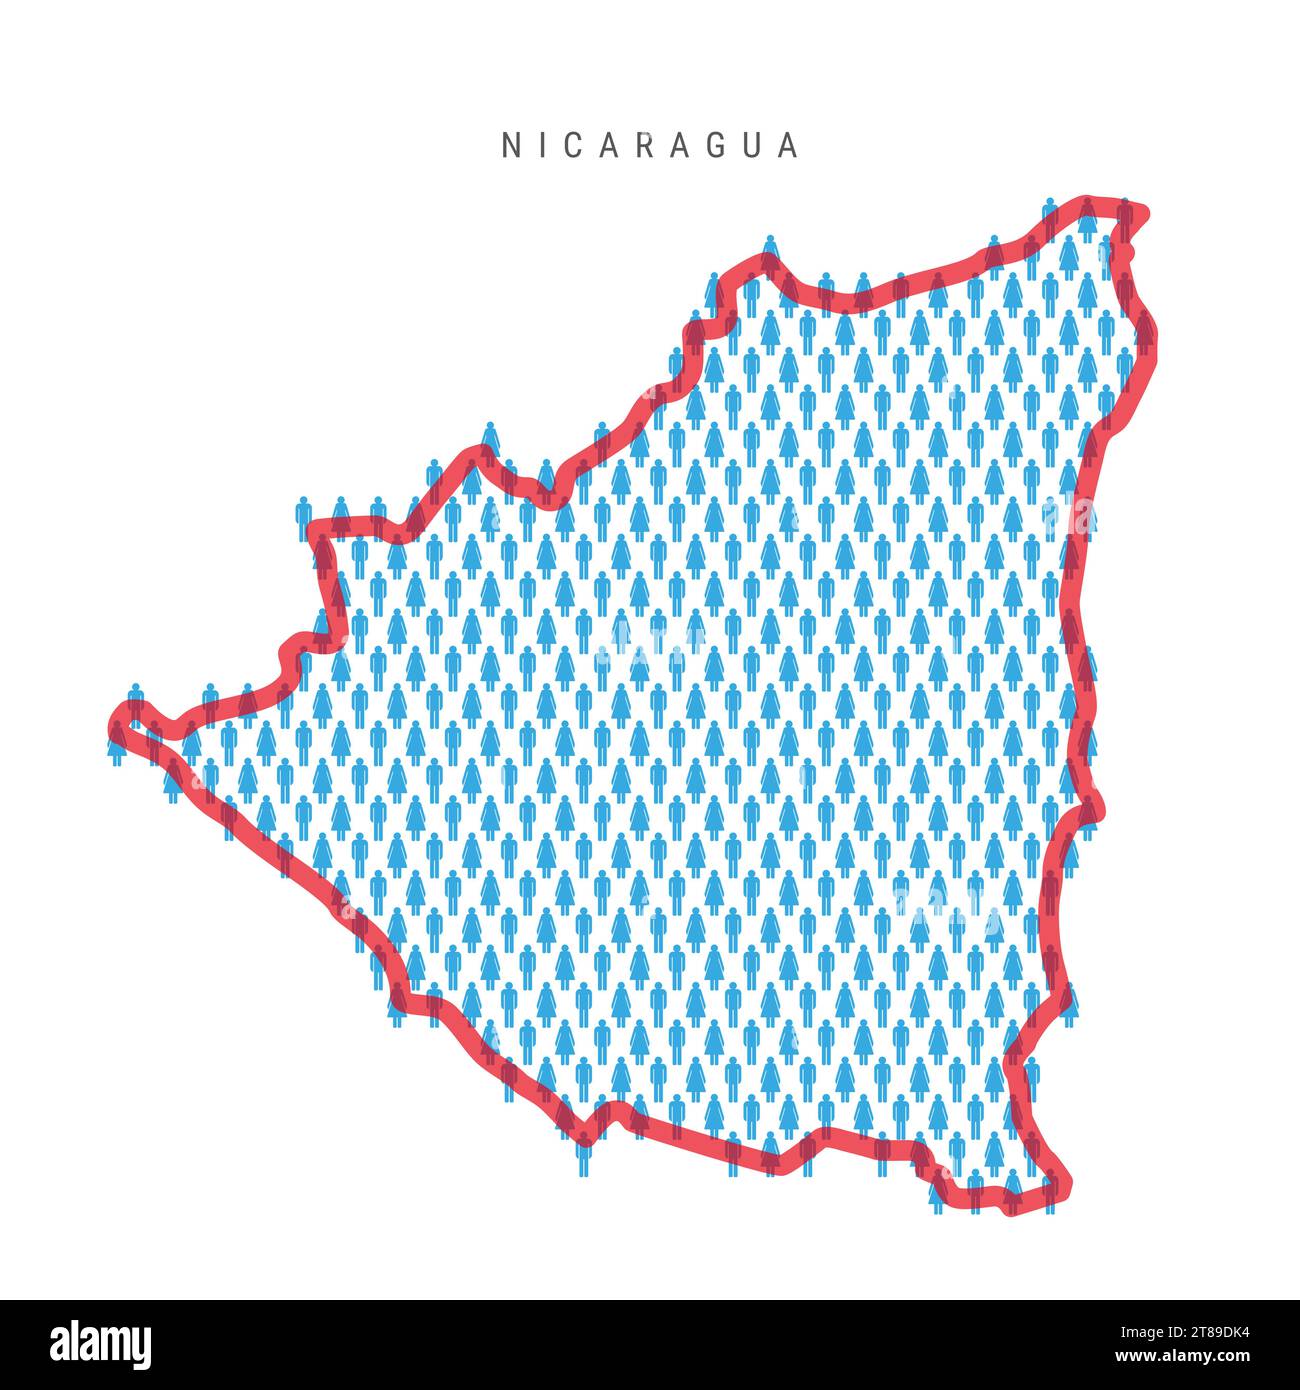 Nicaragua population map. Stick figures Nicaraguan people map with bold red translucent country border. Pattern of men and women icons. Isolated vecto Stock Vector